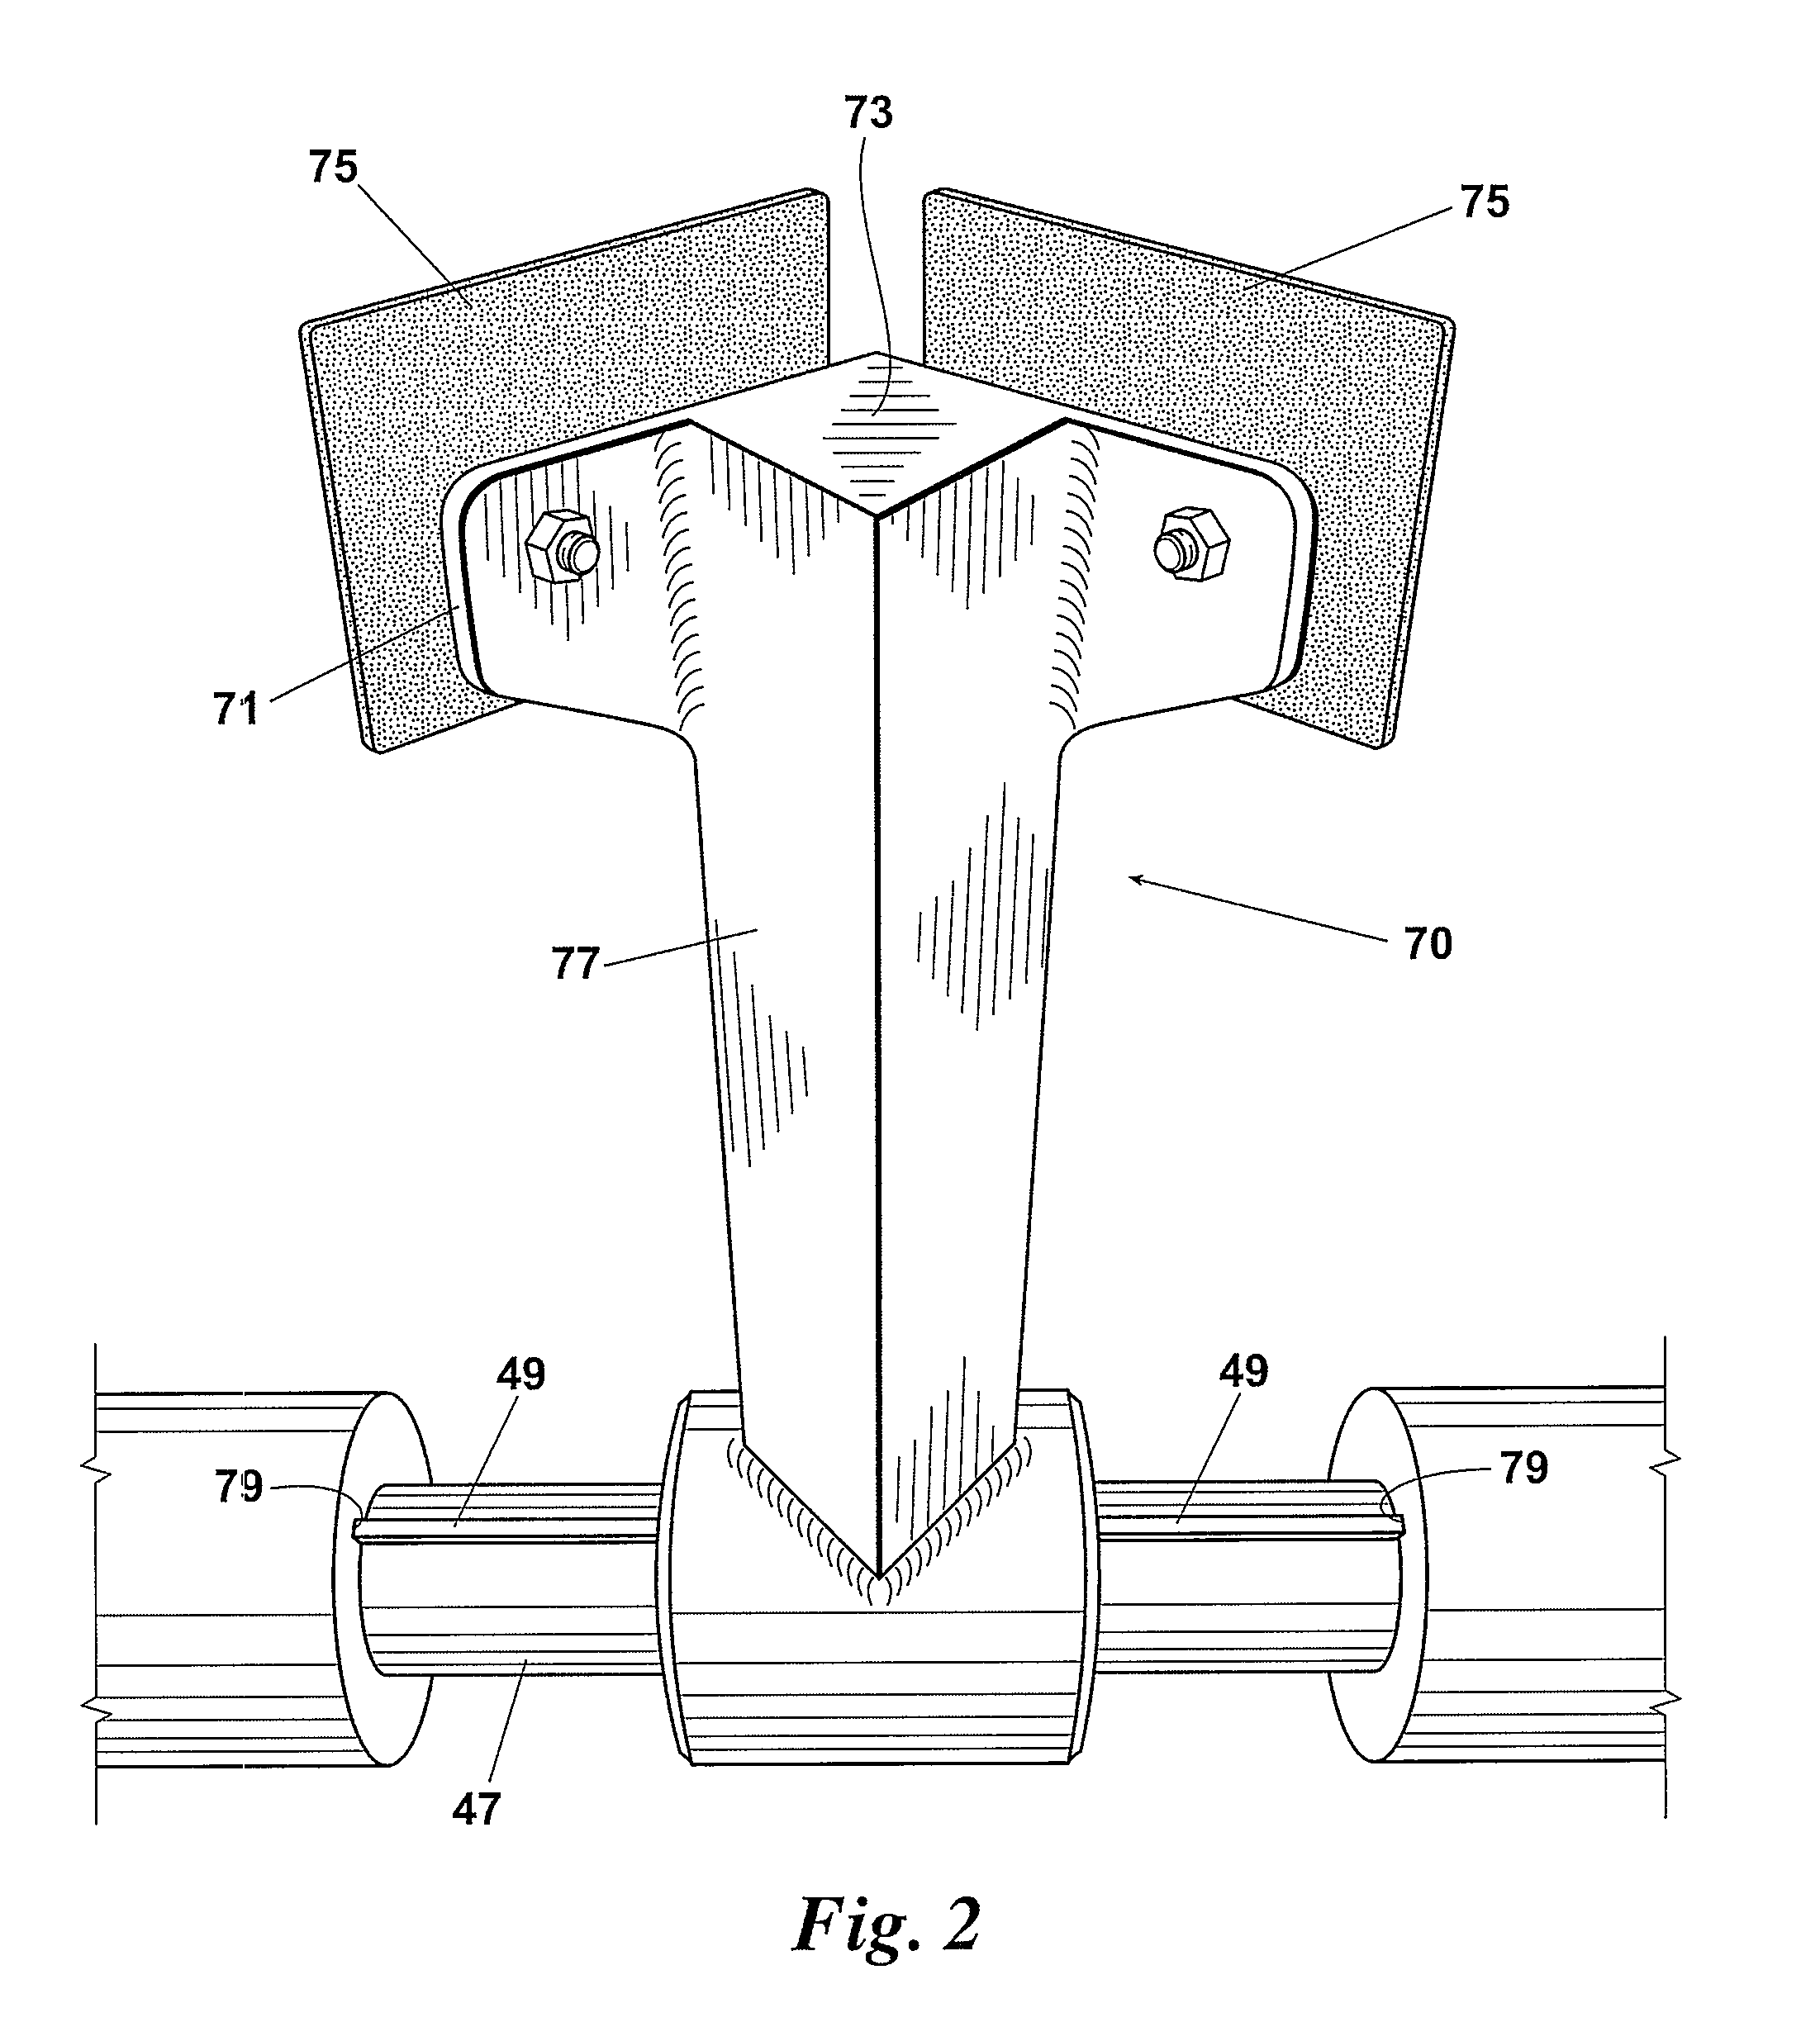 Bio-Reactor System and Method for Composting Food Waste